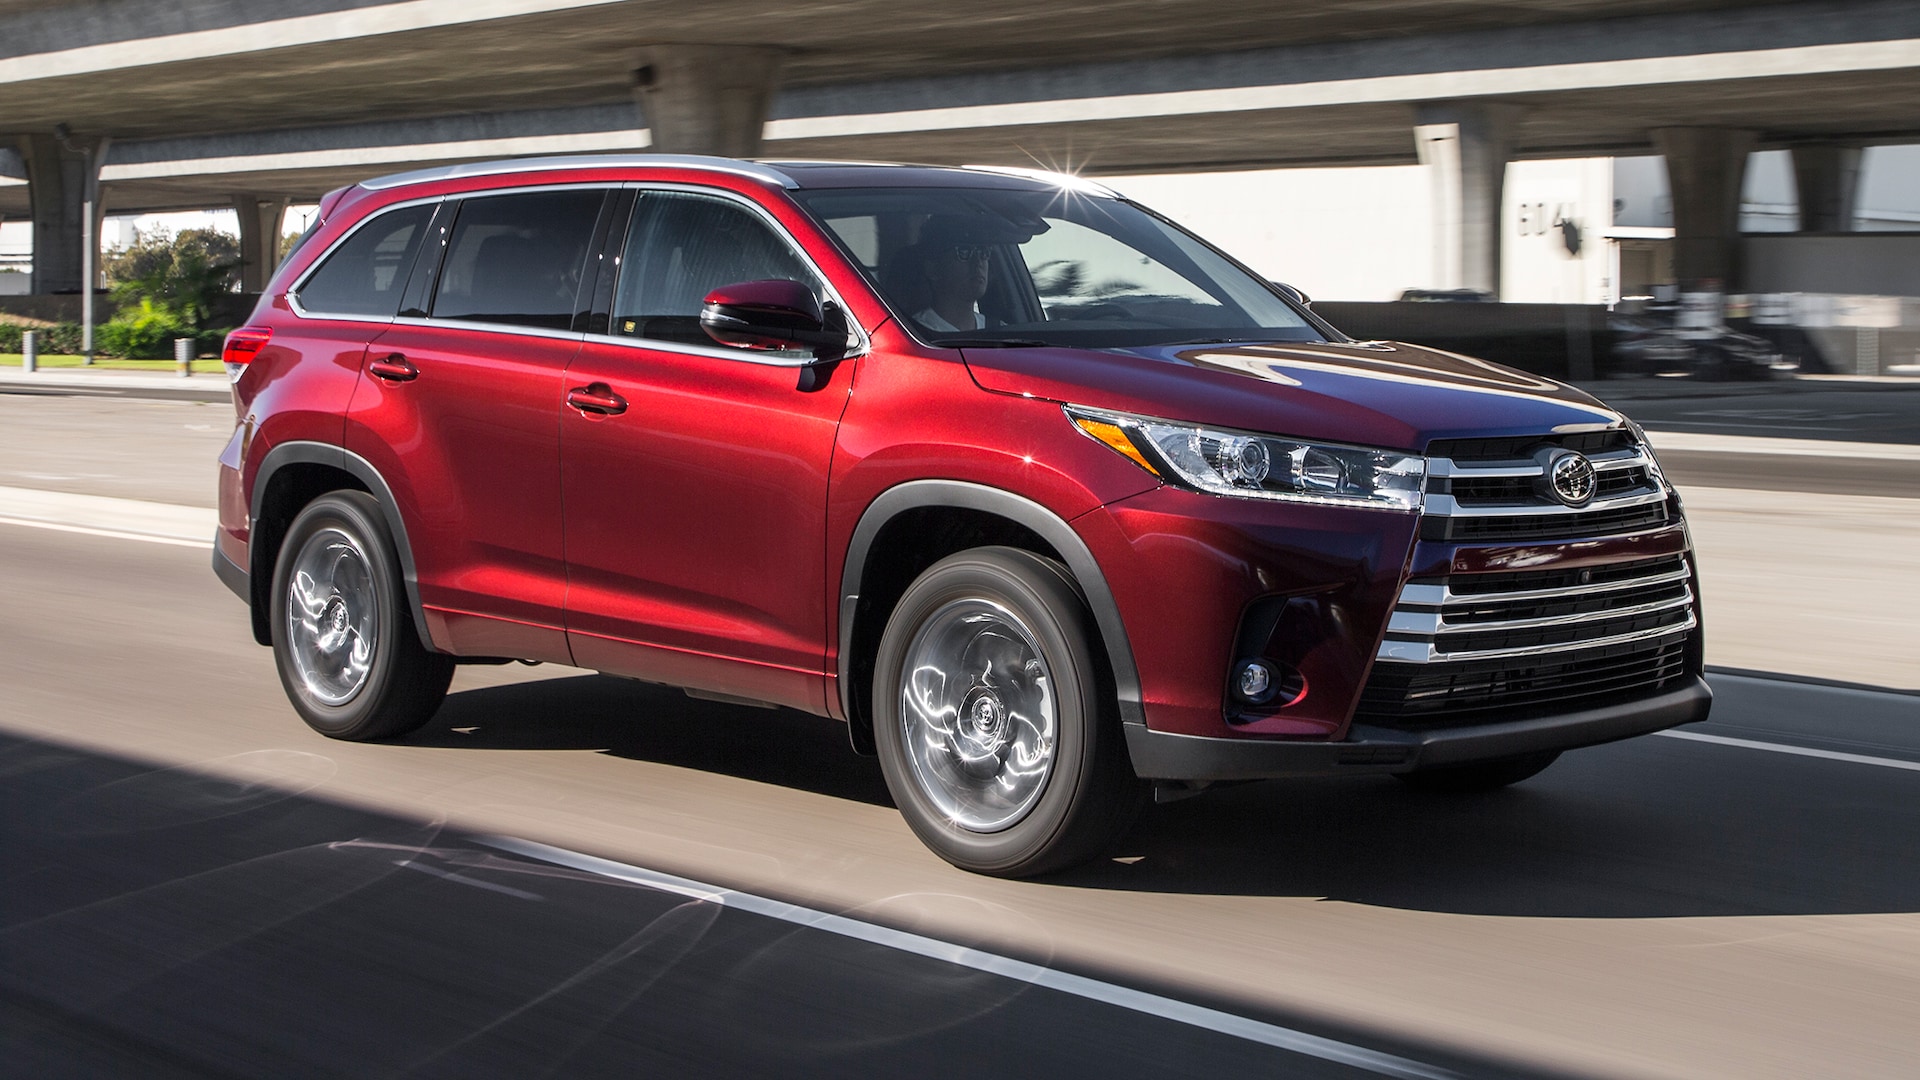 2019 Toyota Highlander Limited Platinum AWD First Test: Aging but Capable